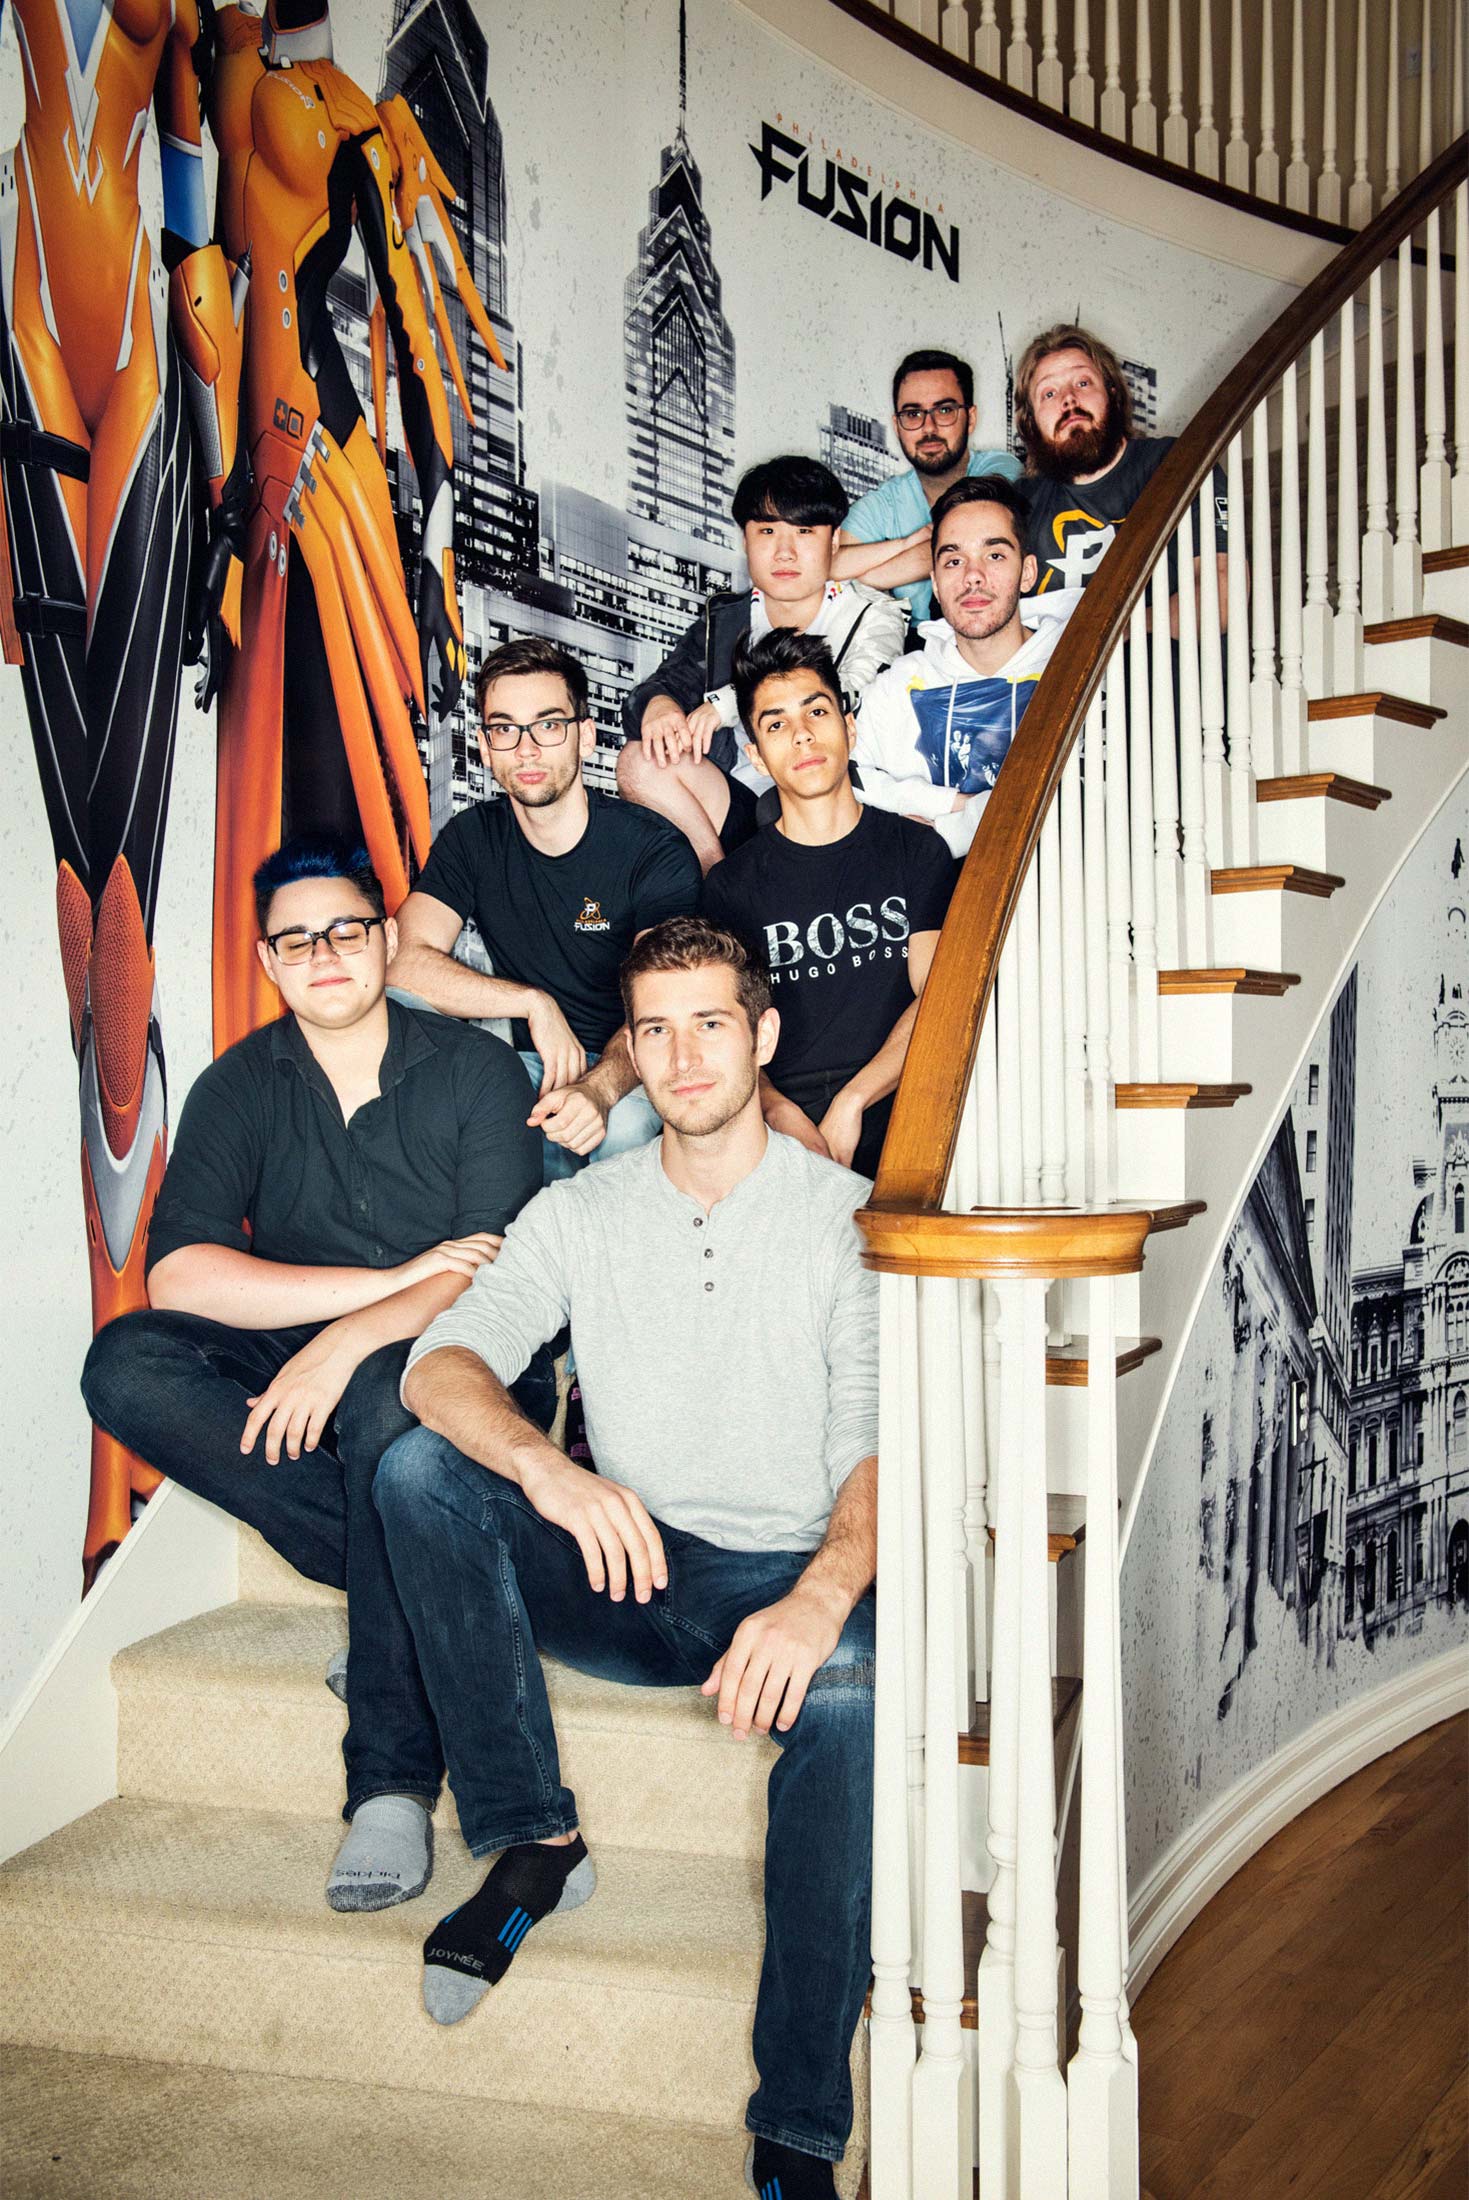 Roberts (front) and the Philadelphia Fusion at the team’s house in Los Angeles.